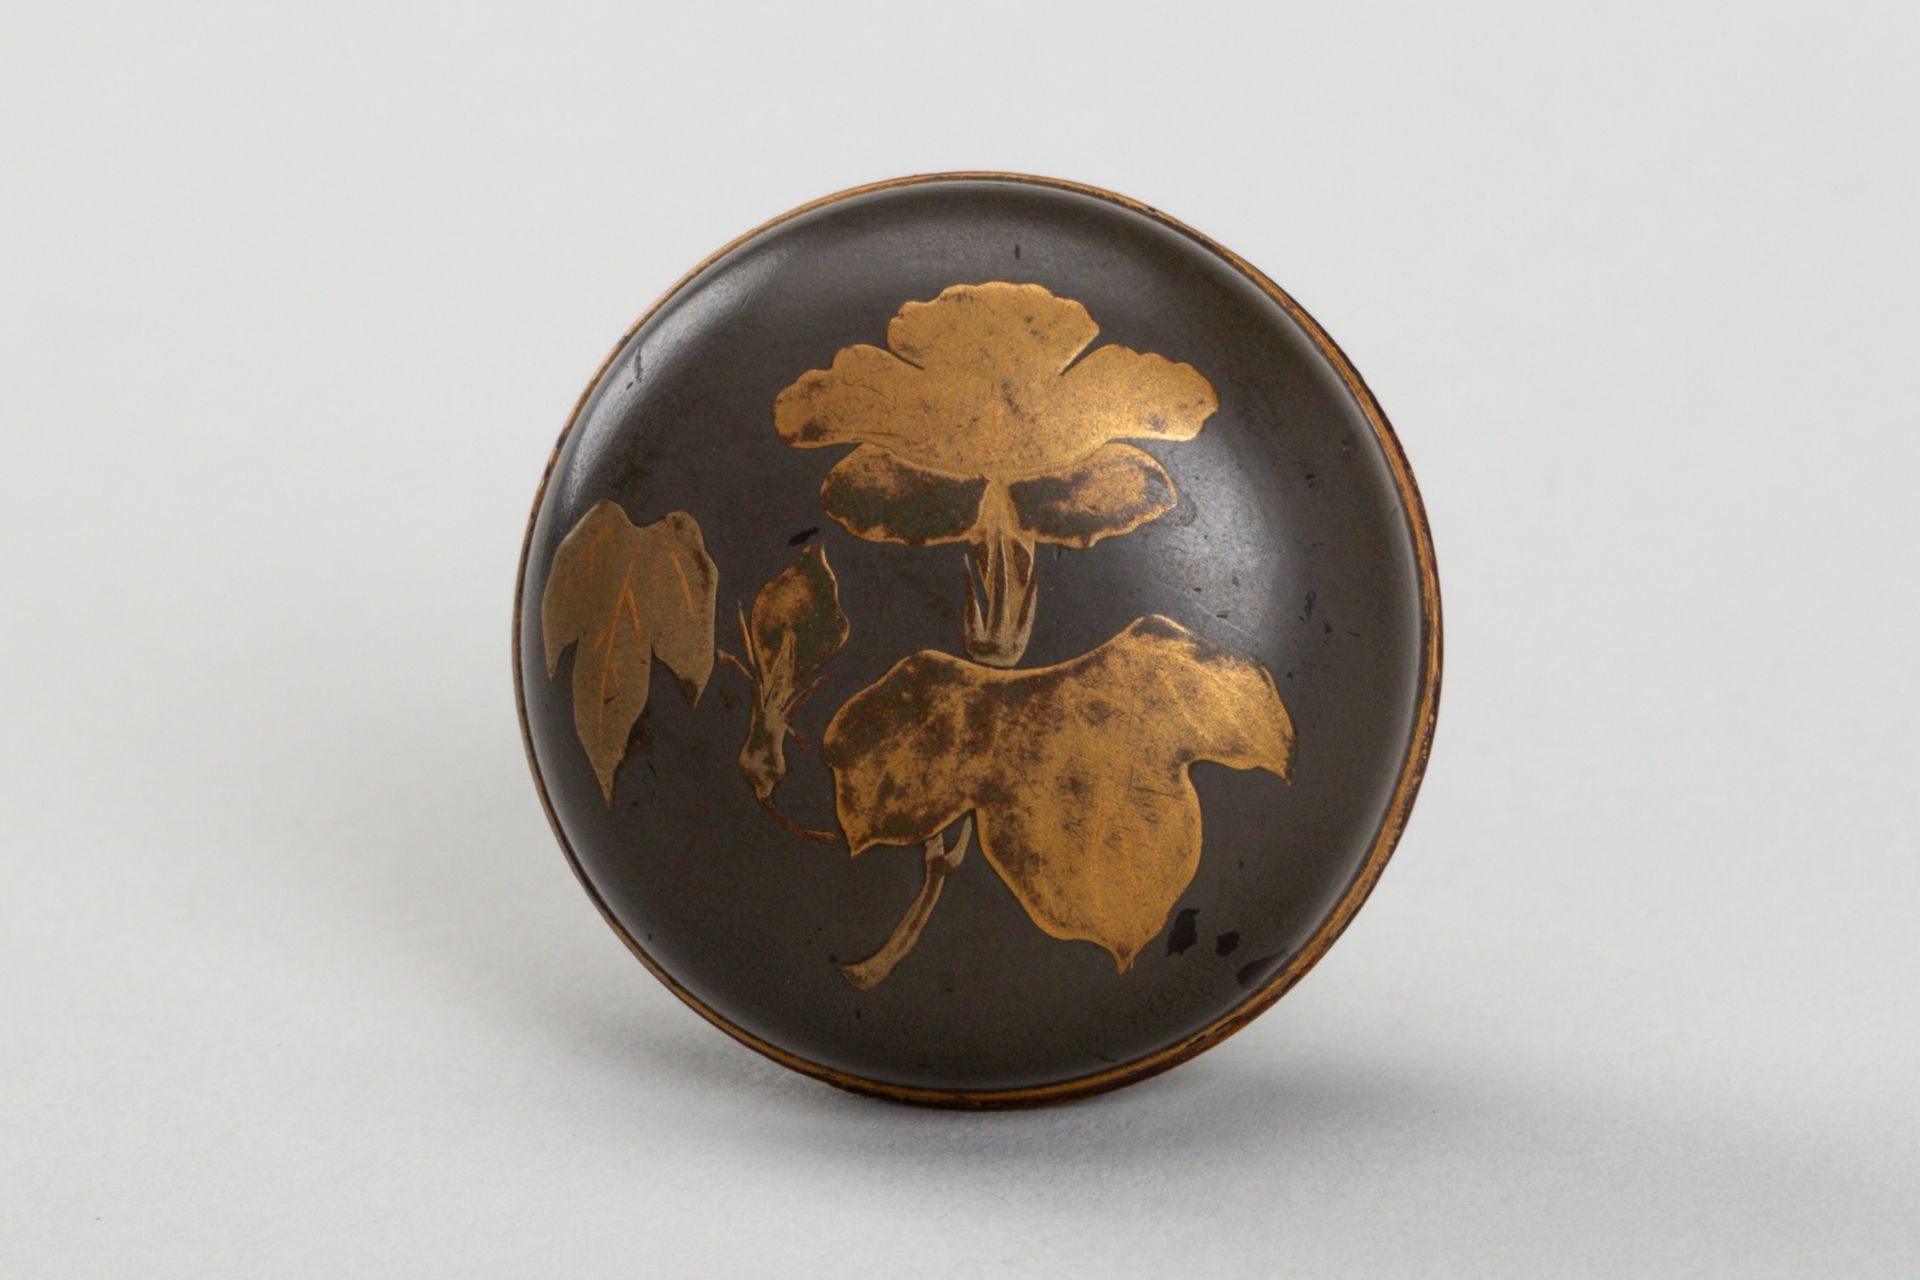 A MINIATURE LACQUER KOGO (INCENSE BOX) AND COVER